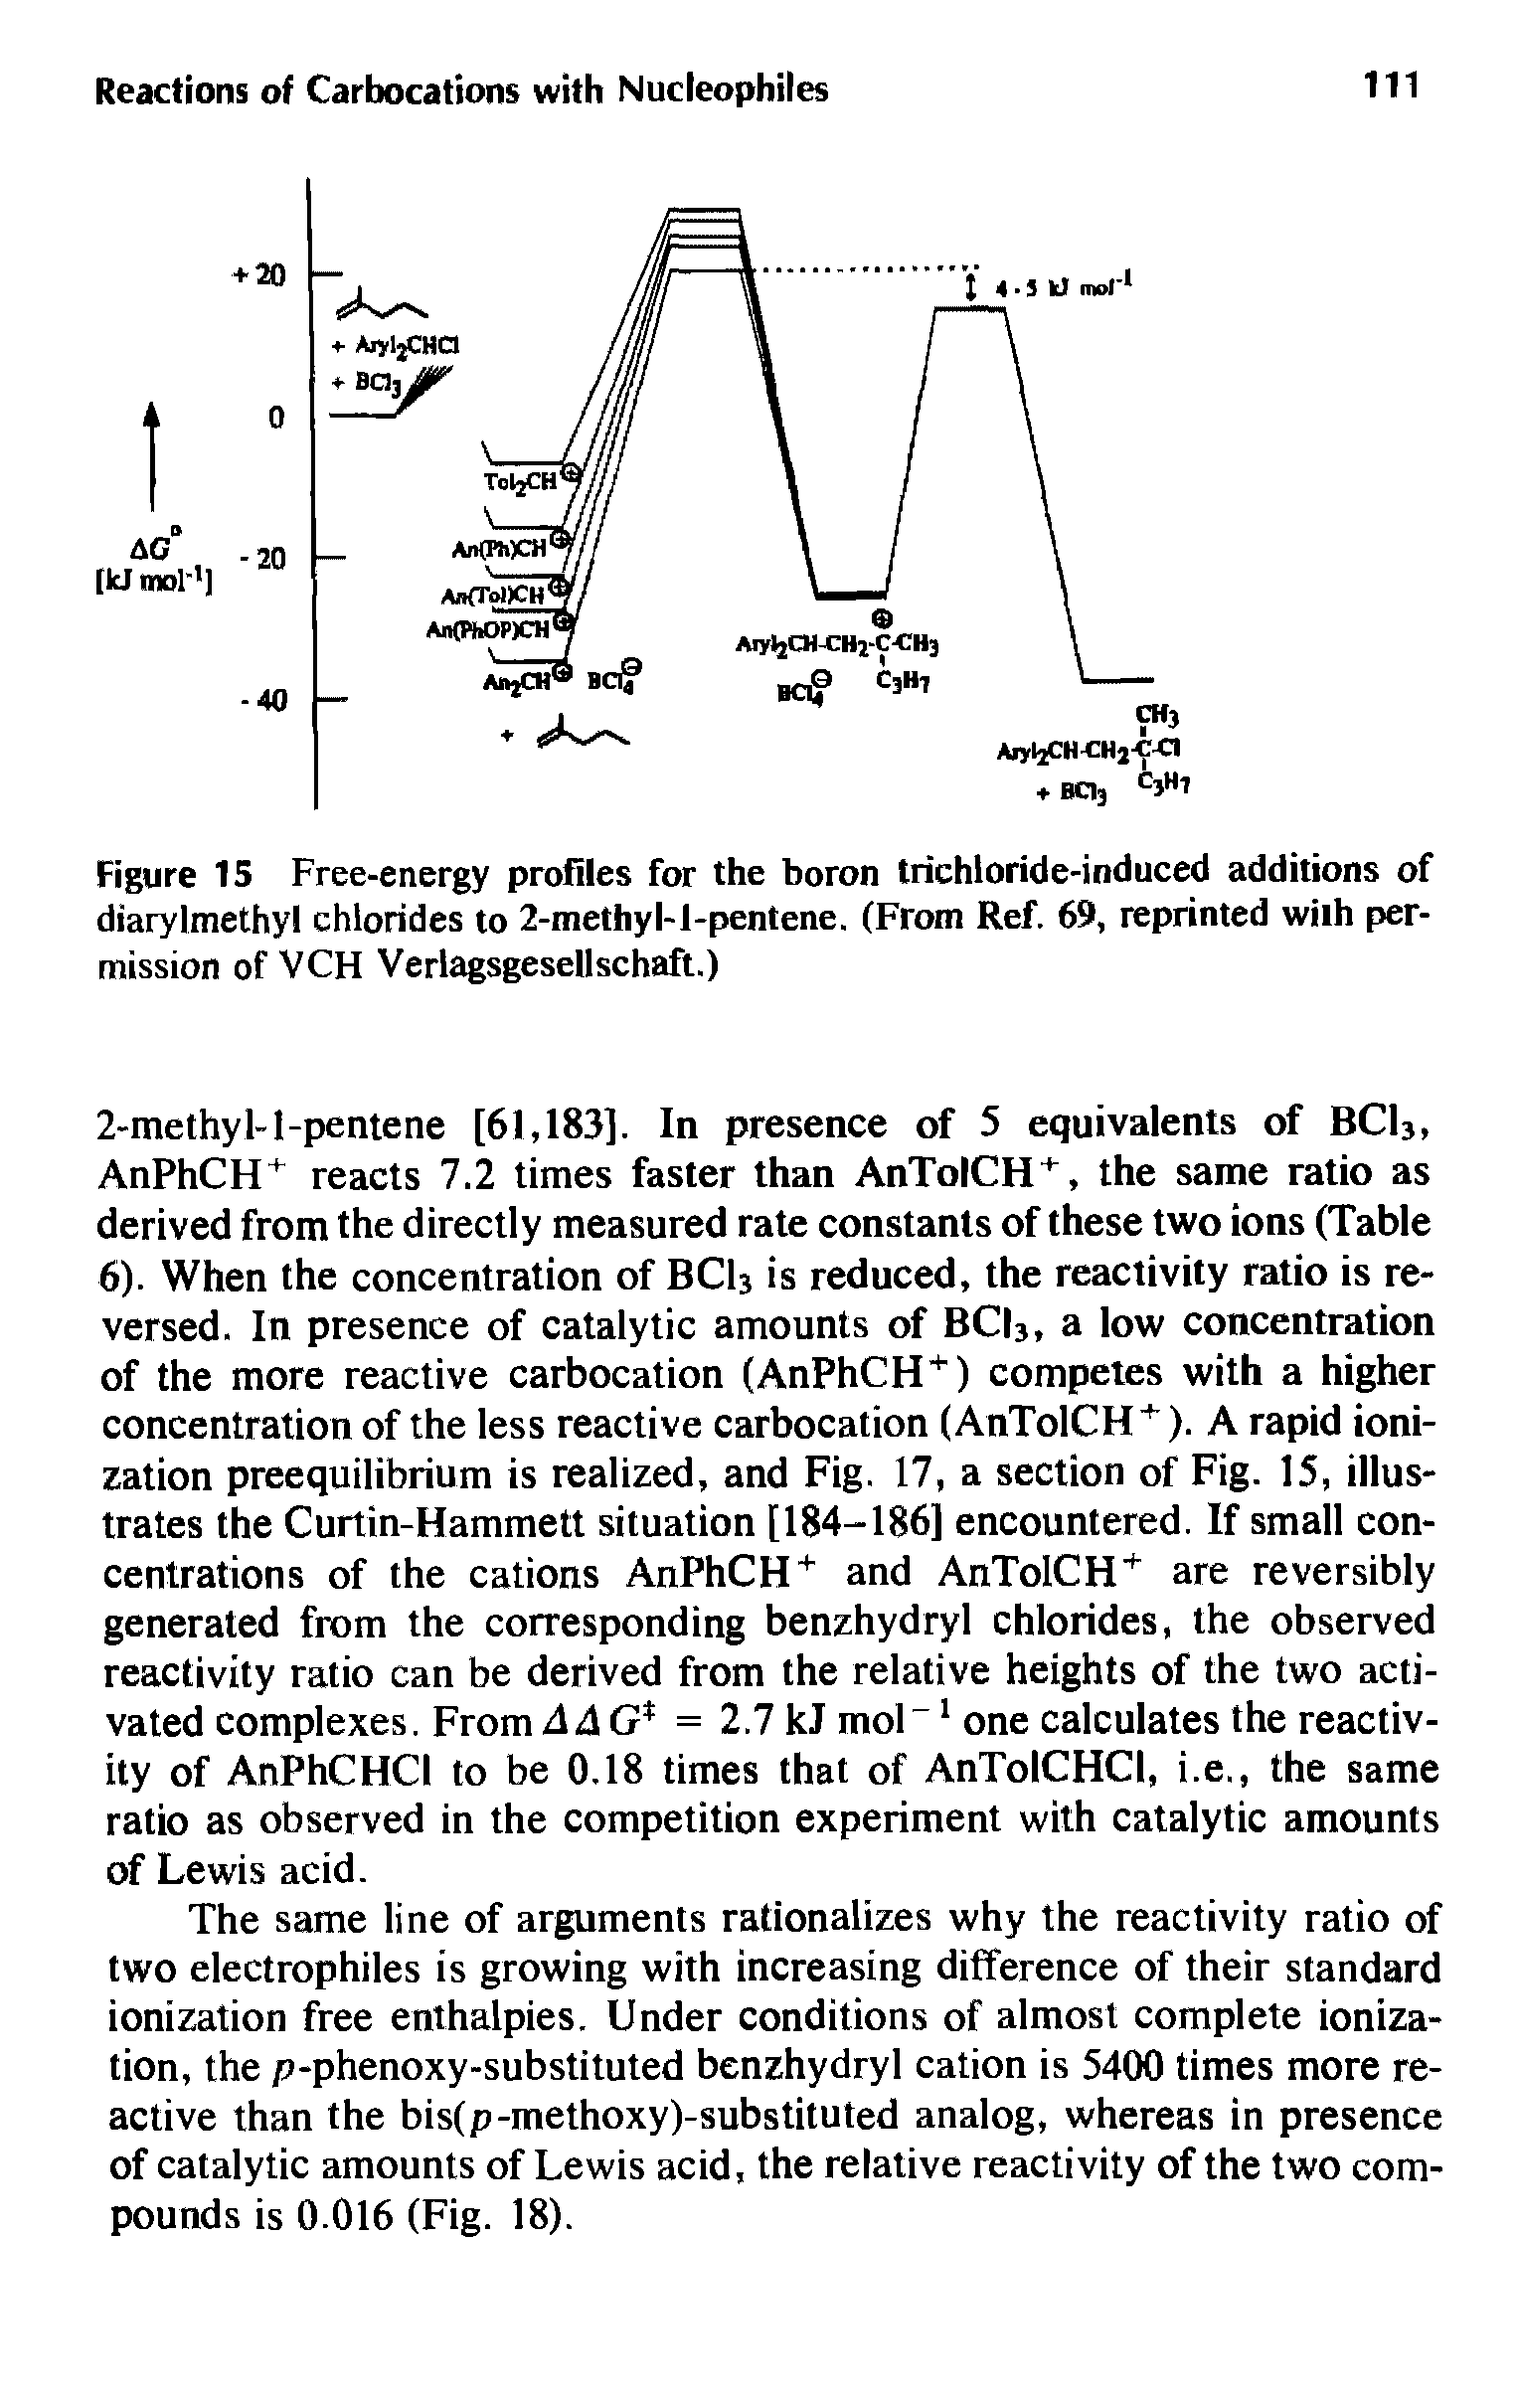 Figure 15 Free-energy profiles for the boron trichloride-induced additions of diarylmethyl chlorides to 2-methyl-l-pentene. (From Ref. 69, reprinted wiih permission of VCH Verlagsgesellschaft.)...